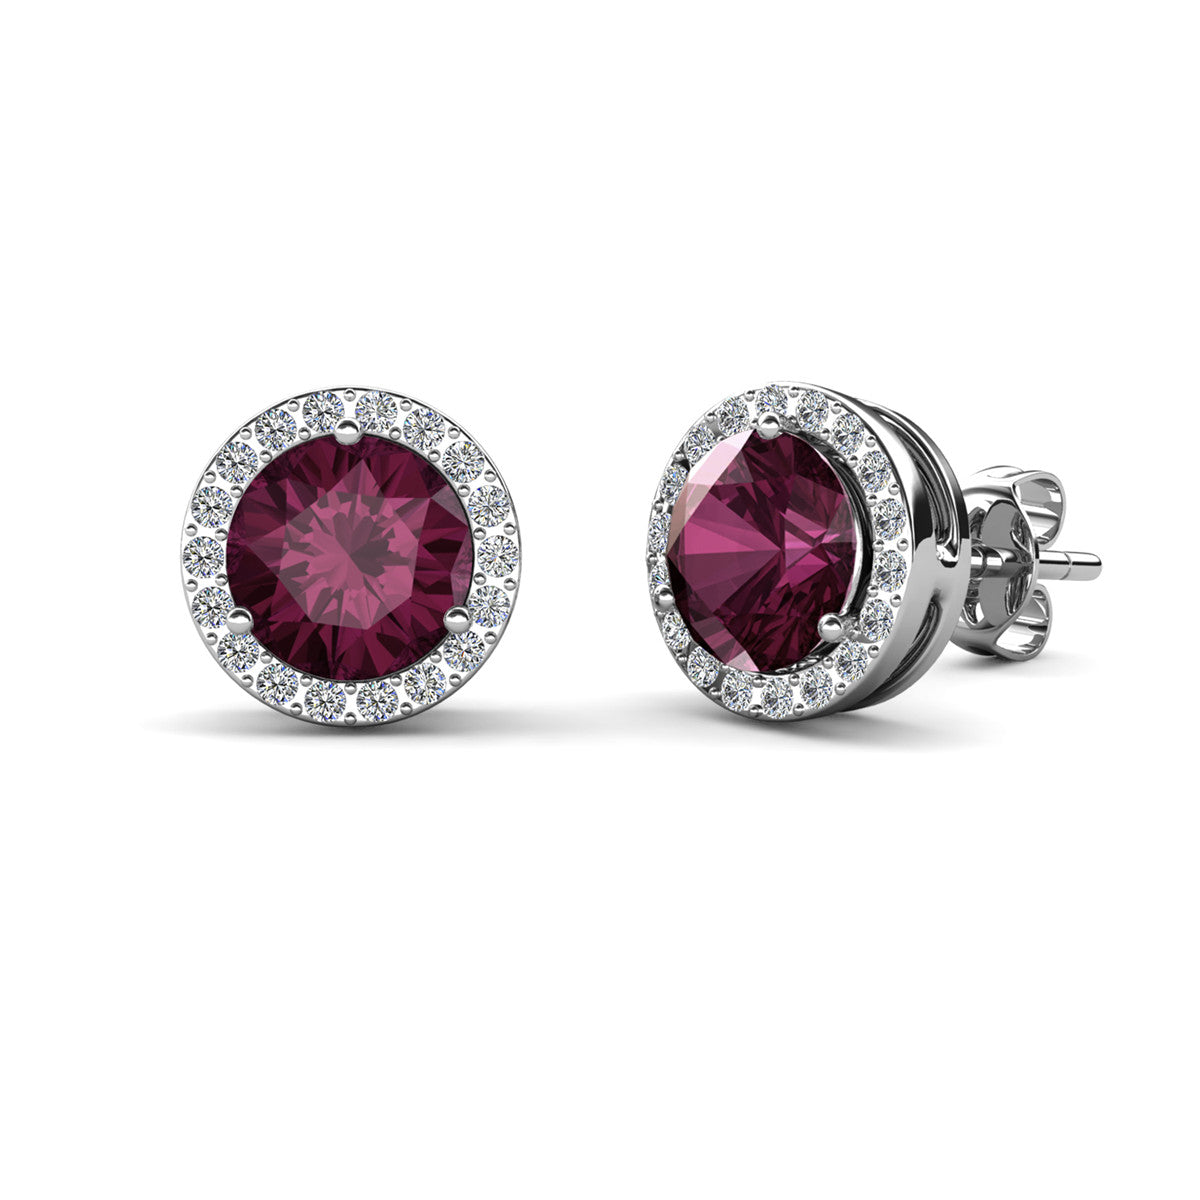 Royal February Birthstone Amethyst Earrings, 18k White Gold Plated Silver Halo Earrings with Round Cut Crystals